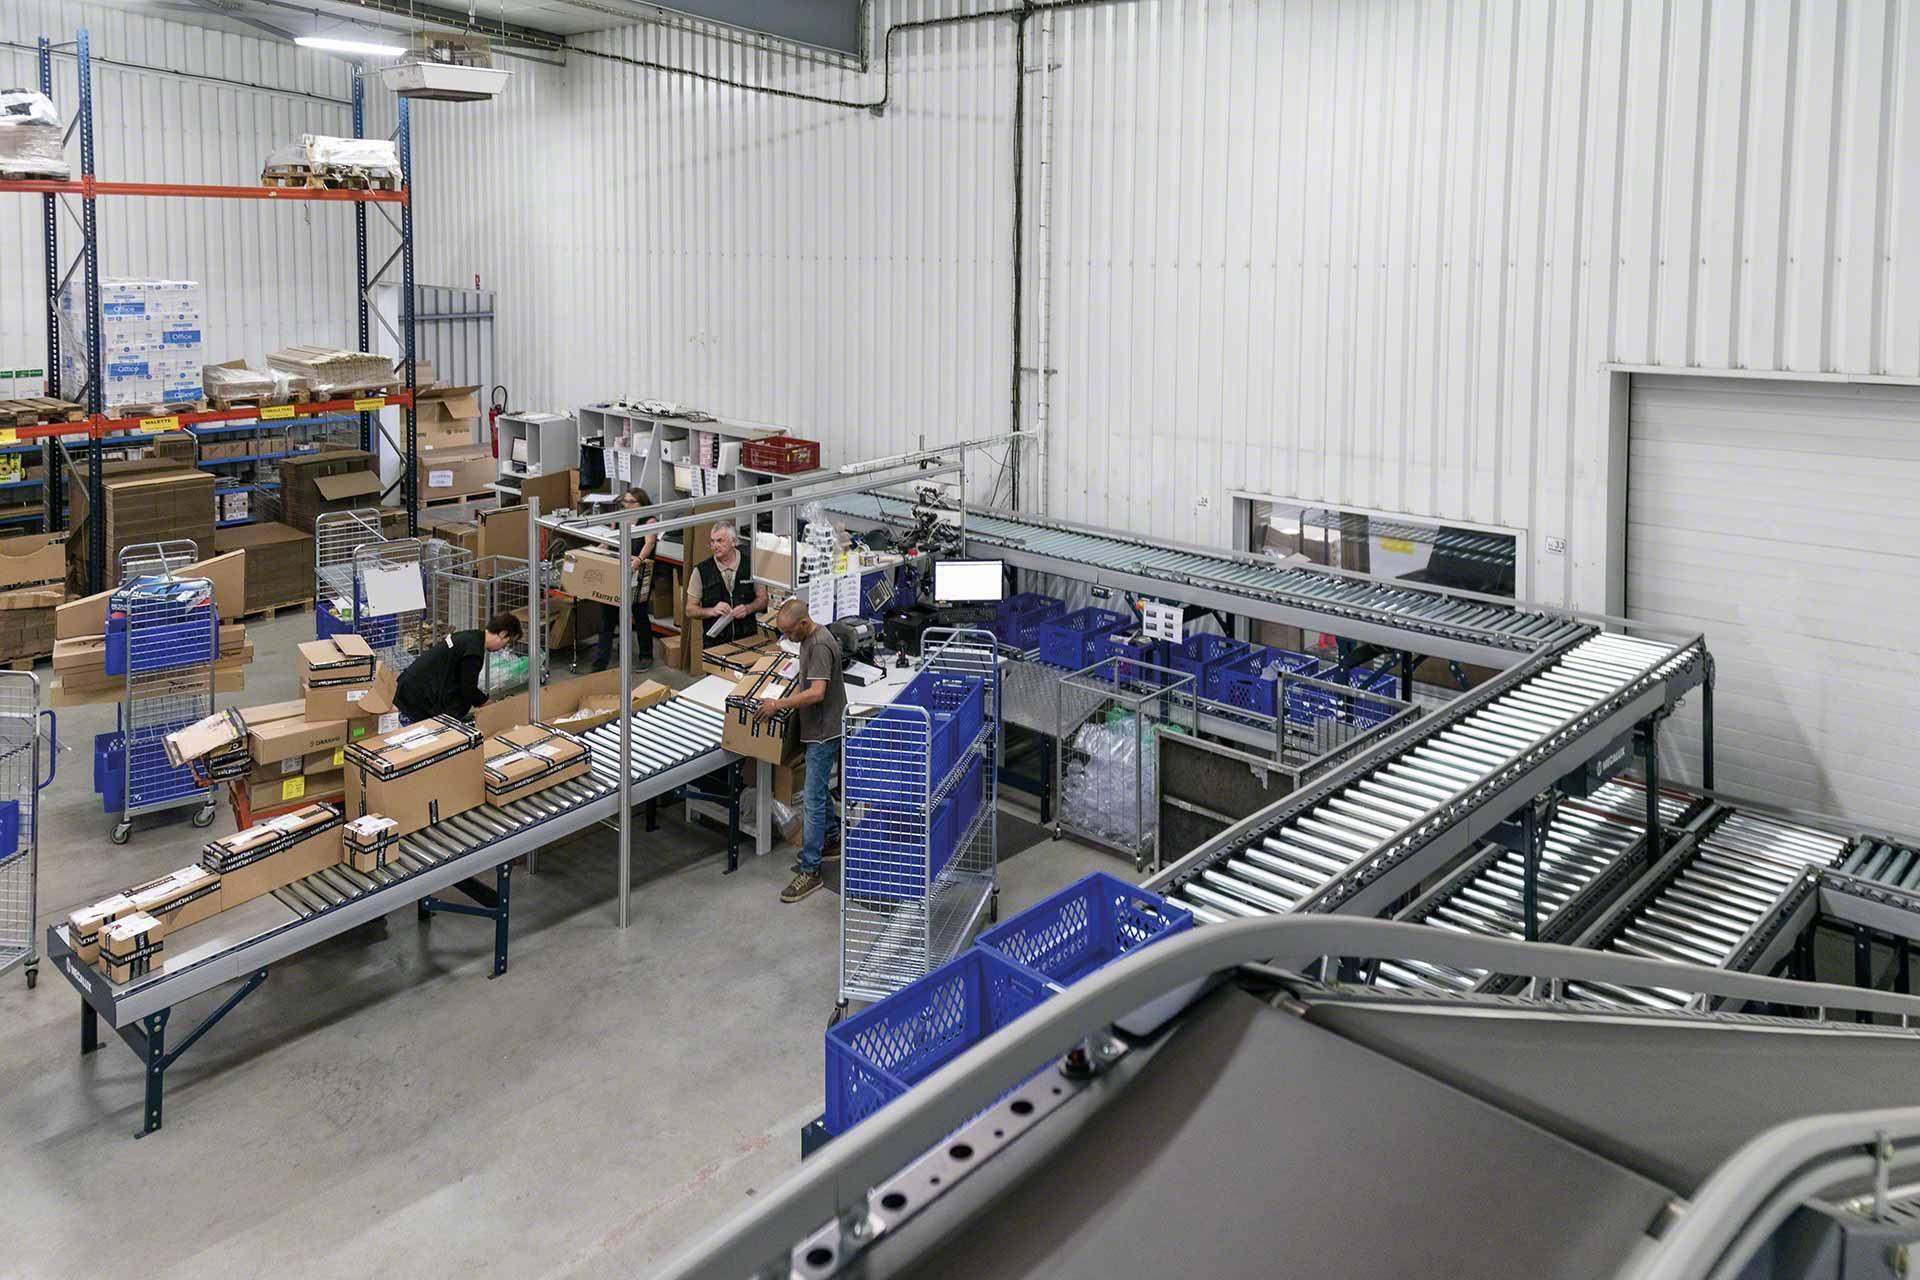 Roller conveyor systems can be installed in order fulfilment areas